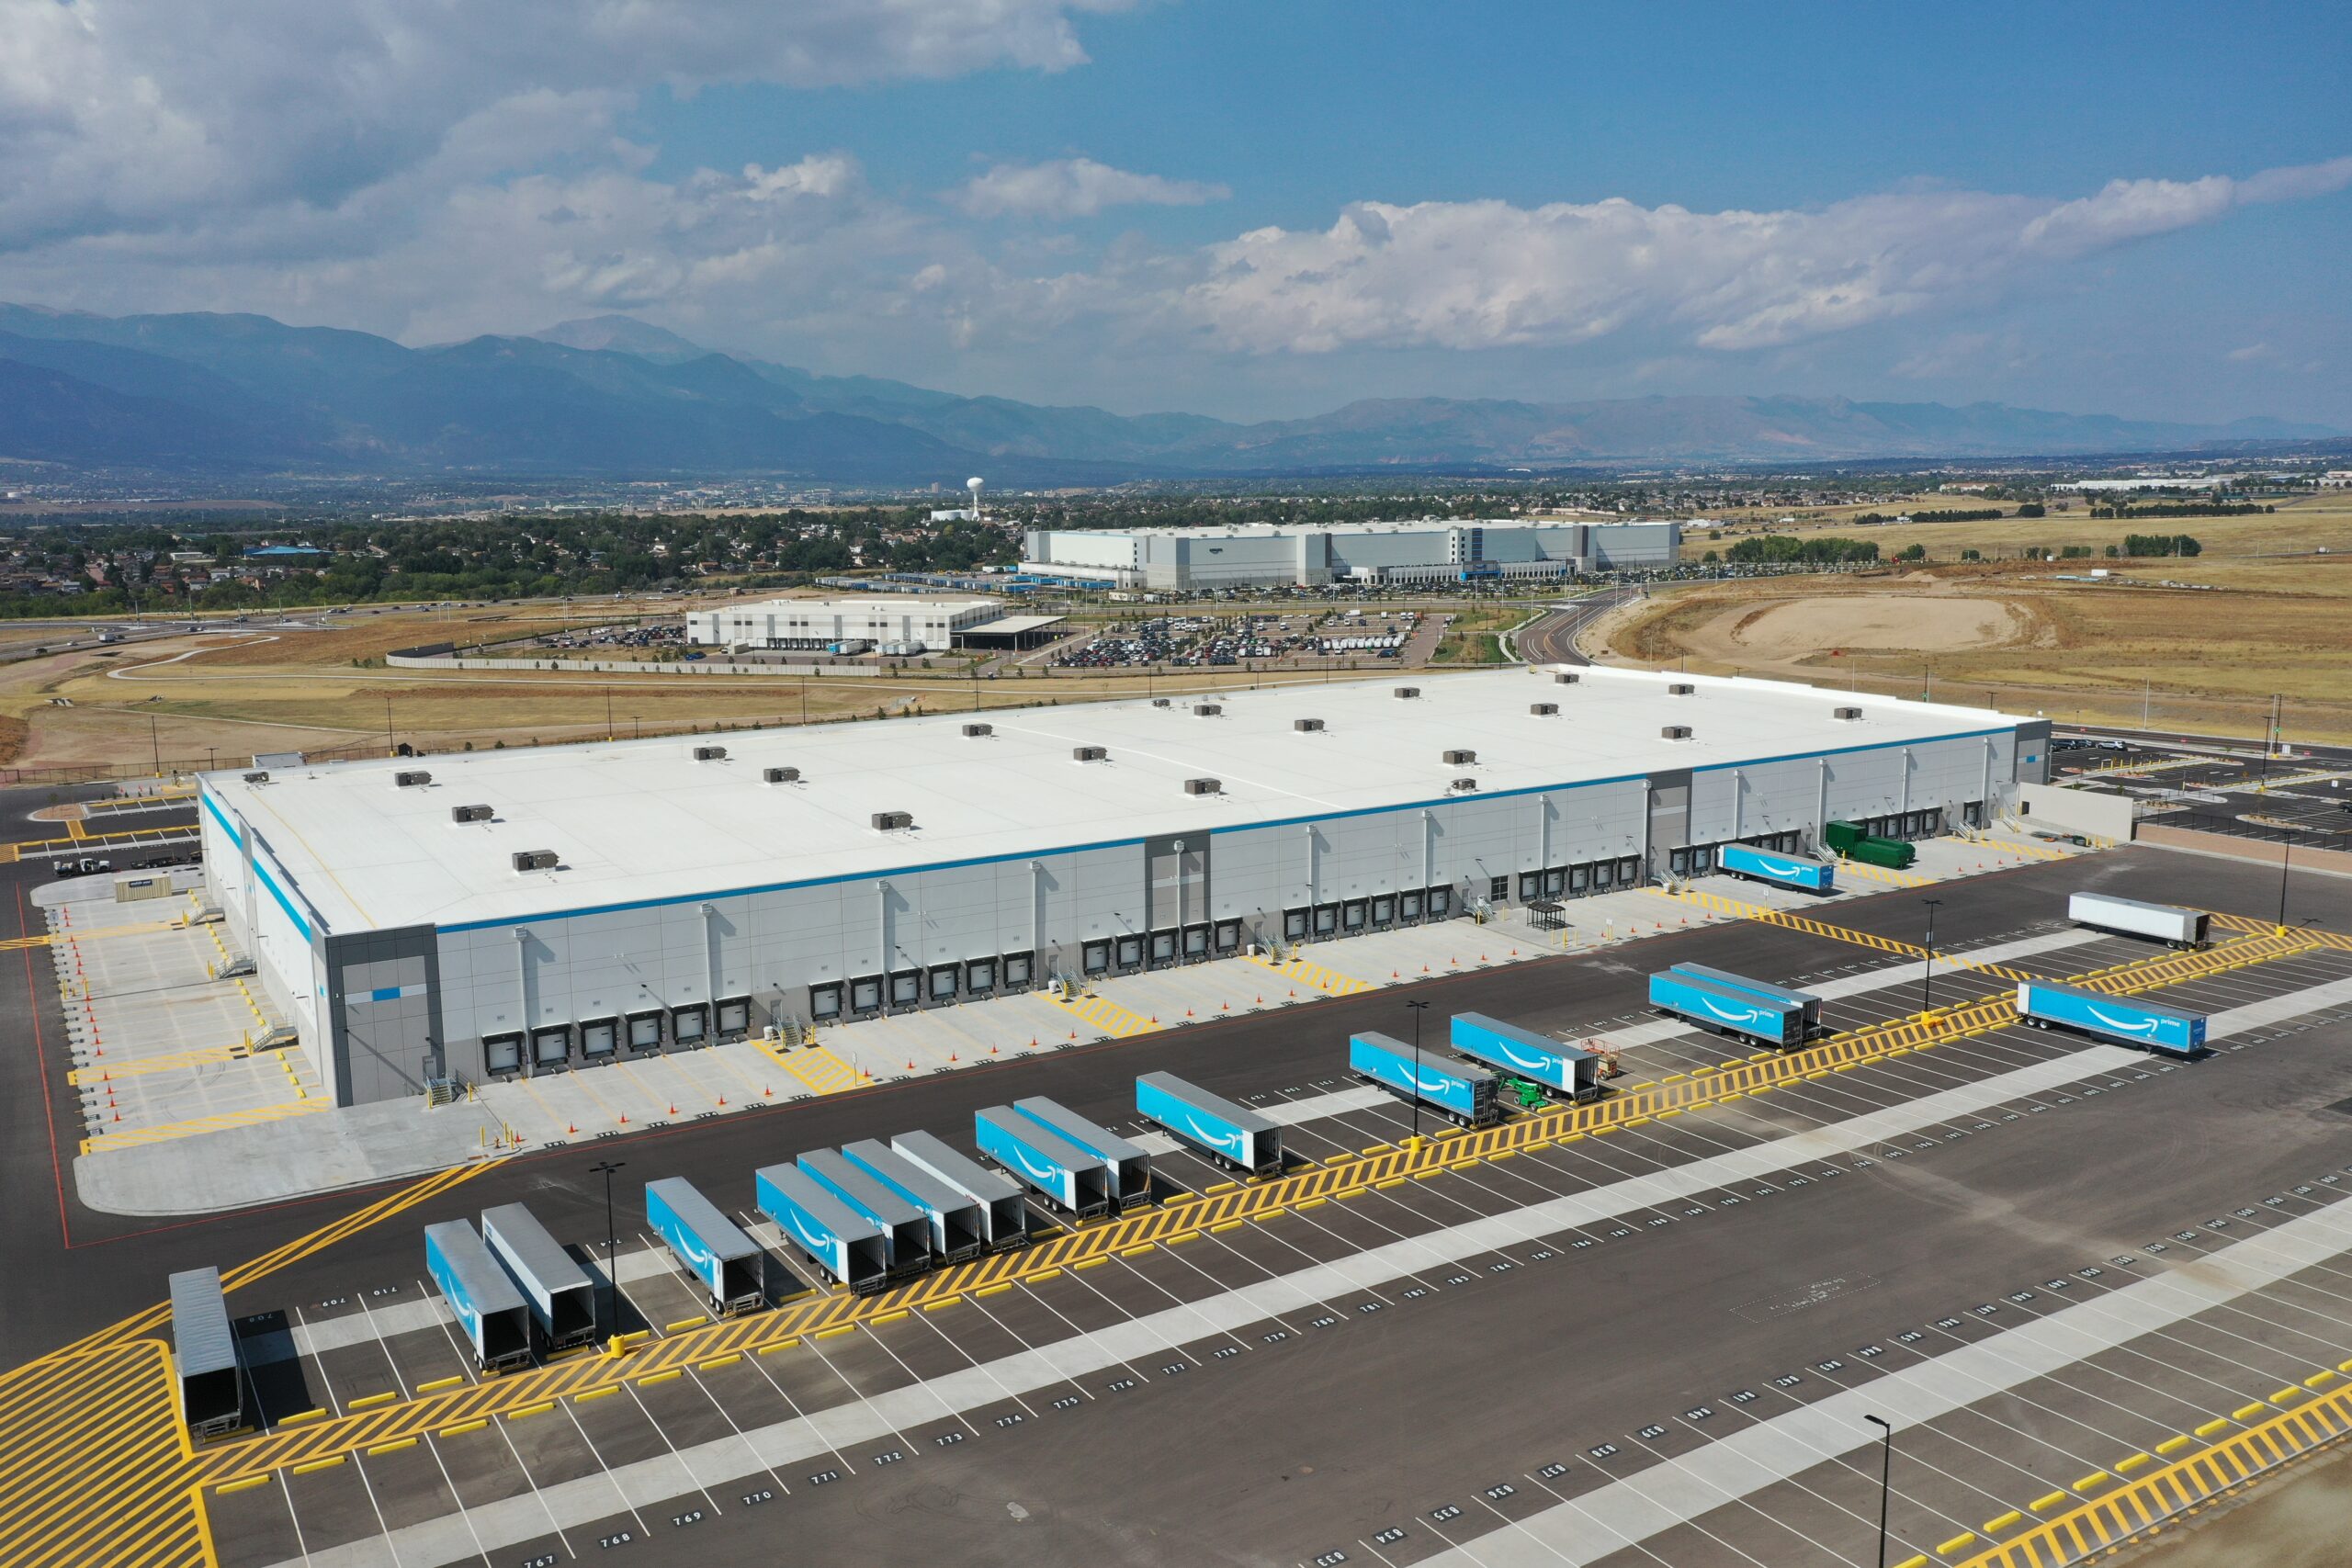 A large distribution warehouse with multiple trailers parked in a mountainous area